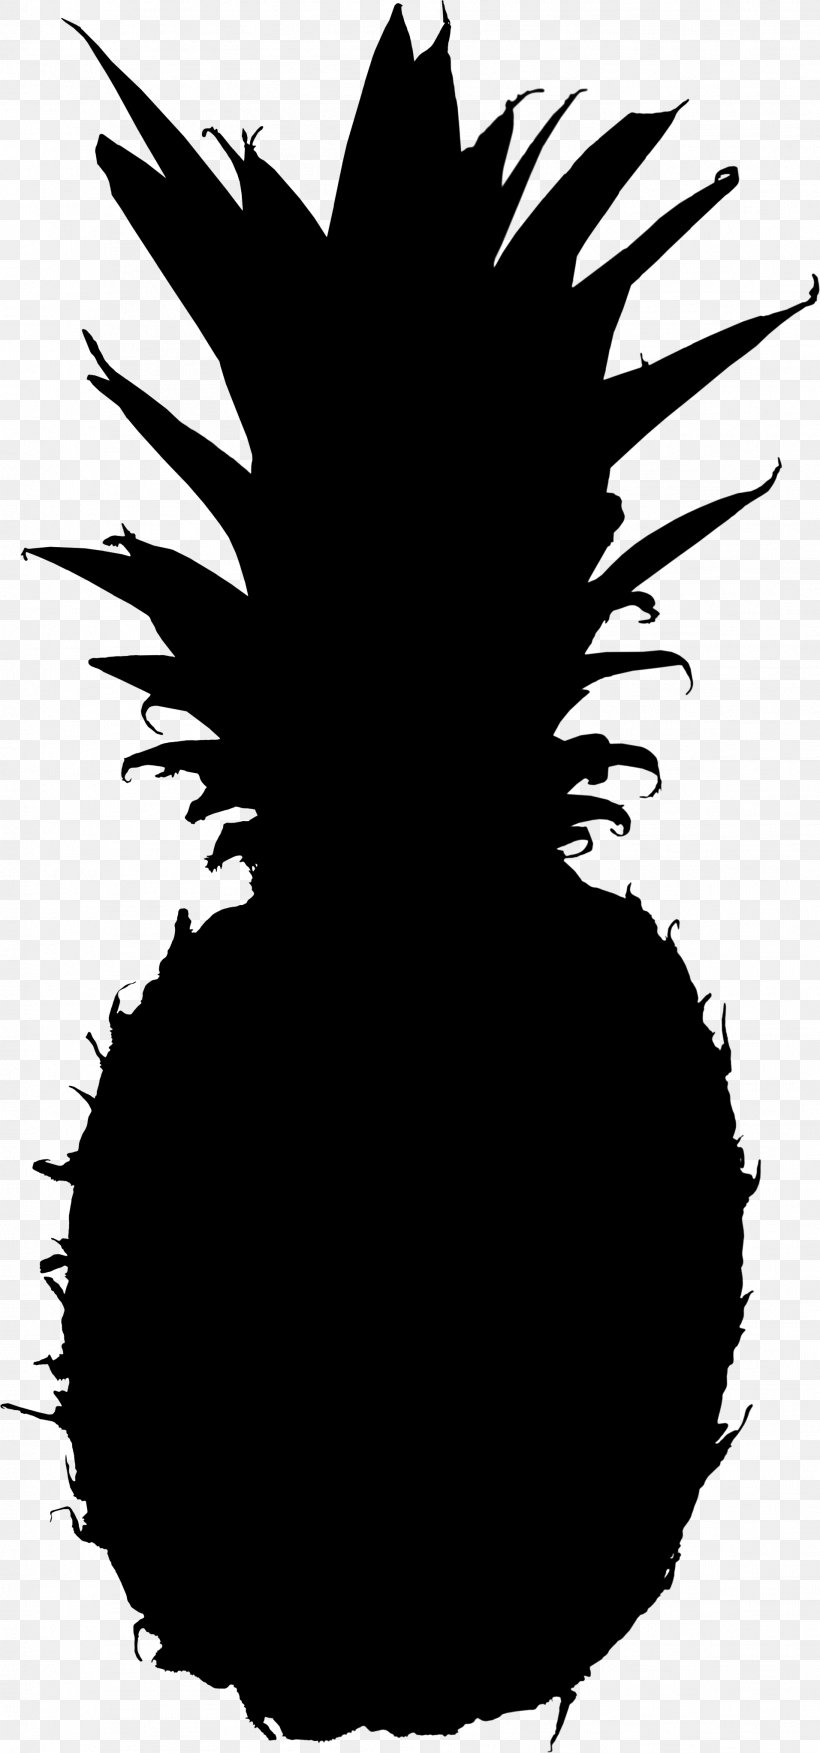 Clip Art Silhouette Vector Graphics Image, PNG, 1912x4089px, Silhouette, Ananas, Art, Black, Blackandwhite Download Free